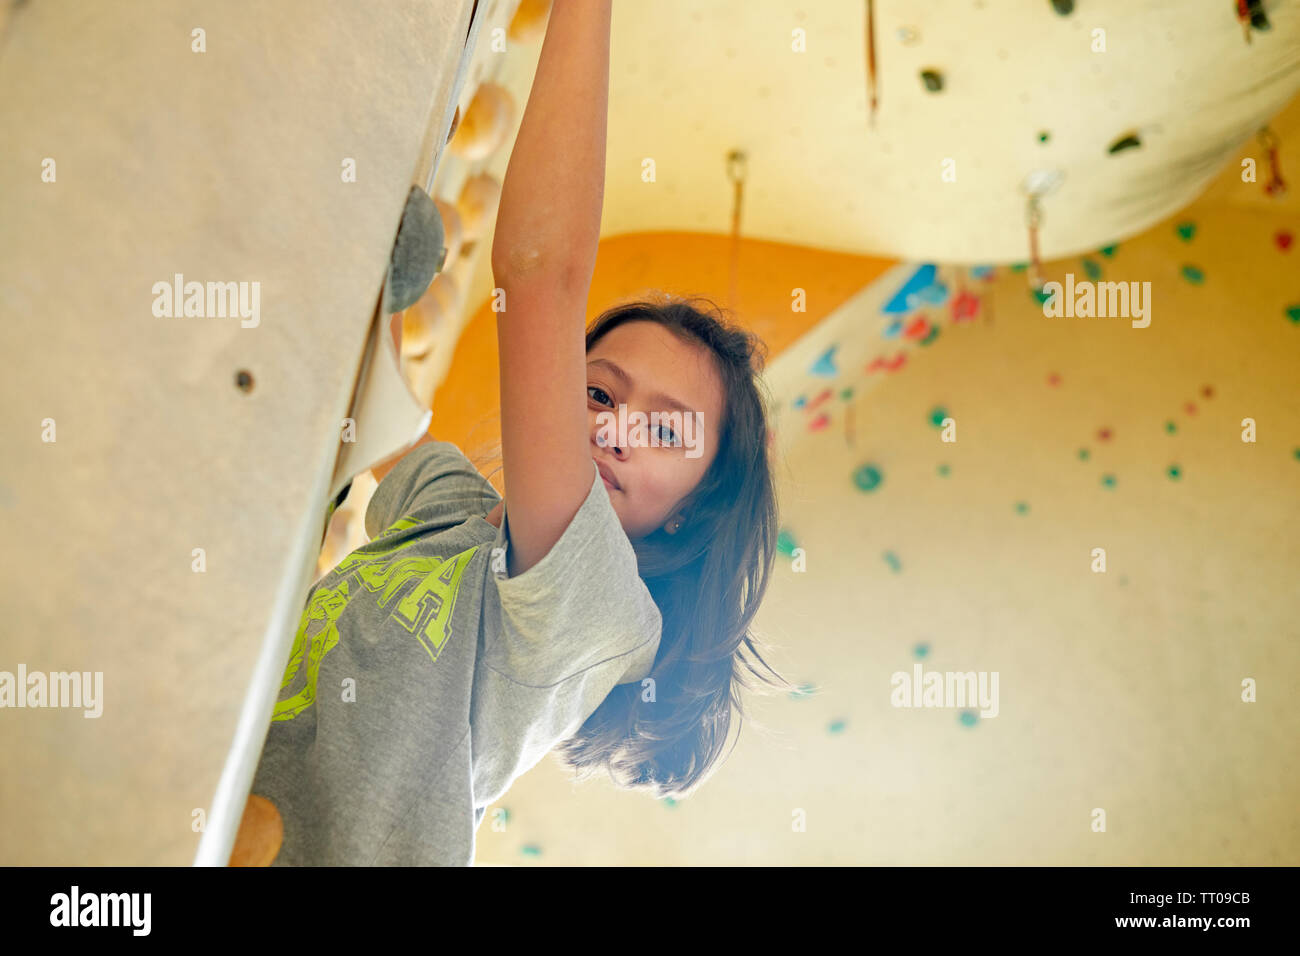 Young girl climbing inside a climbing hall learning new skills Stock Photo